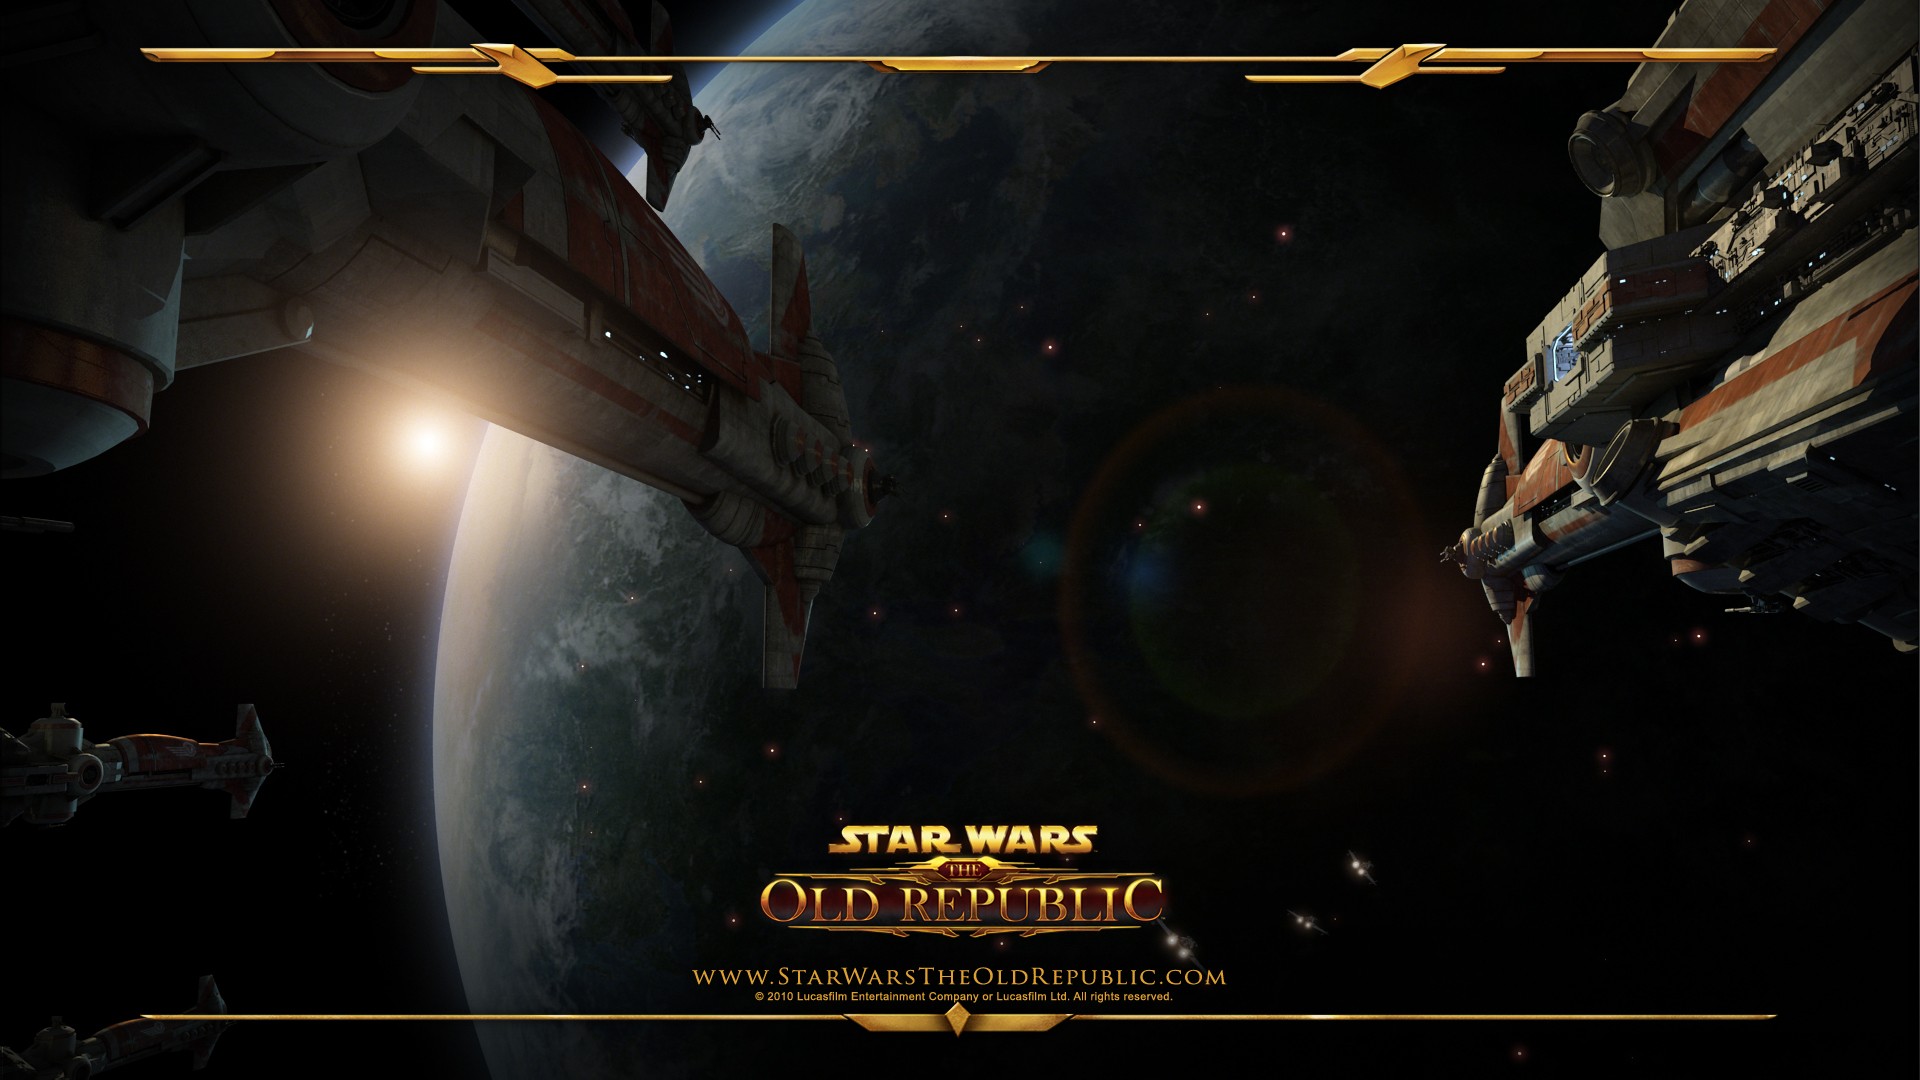 General 1920x1080 Star Wars Star Wars: The Old Republic PC gaming science fiction